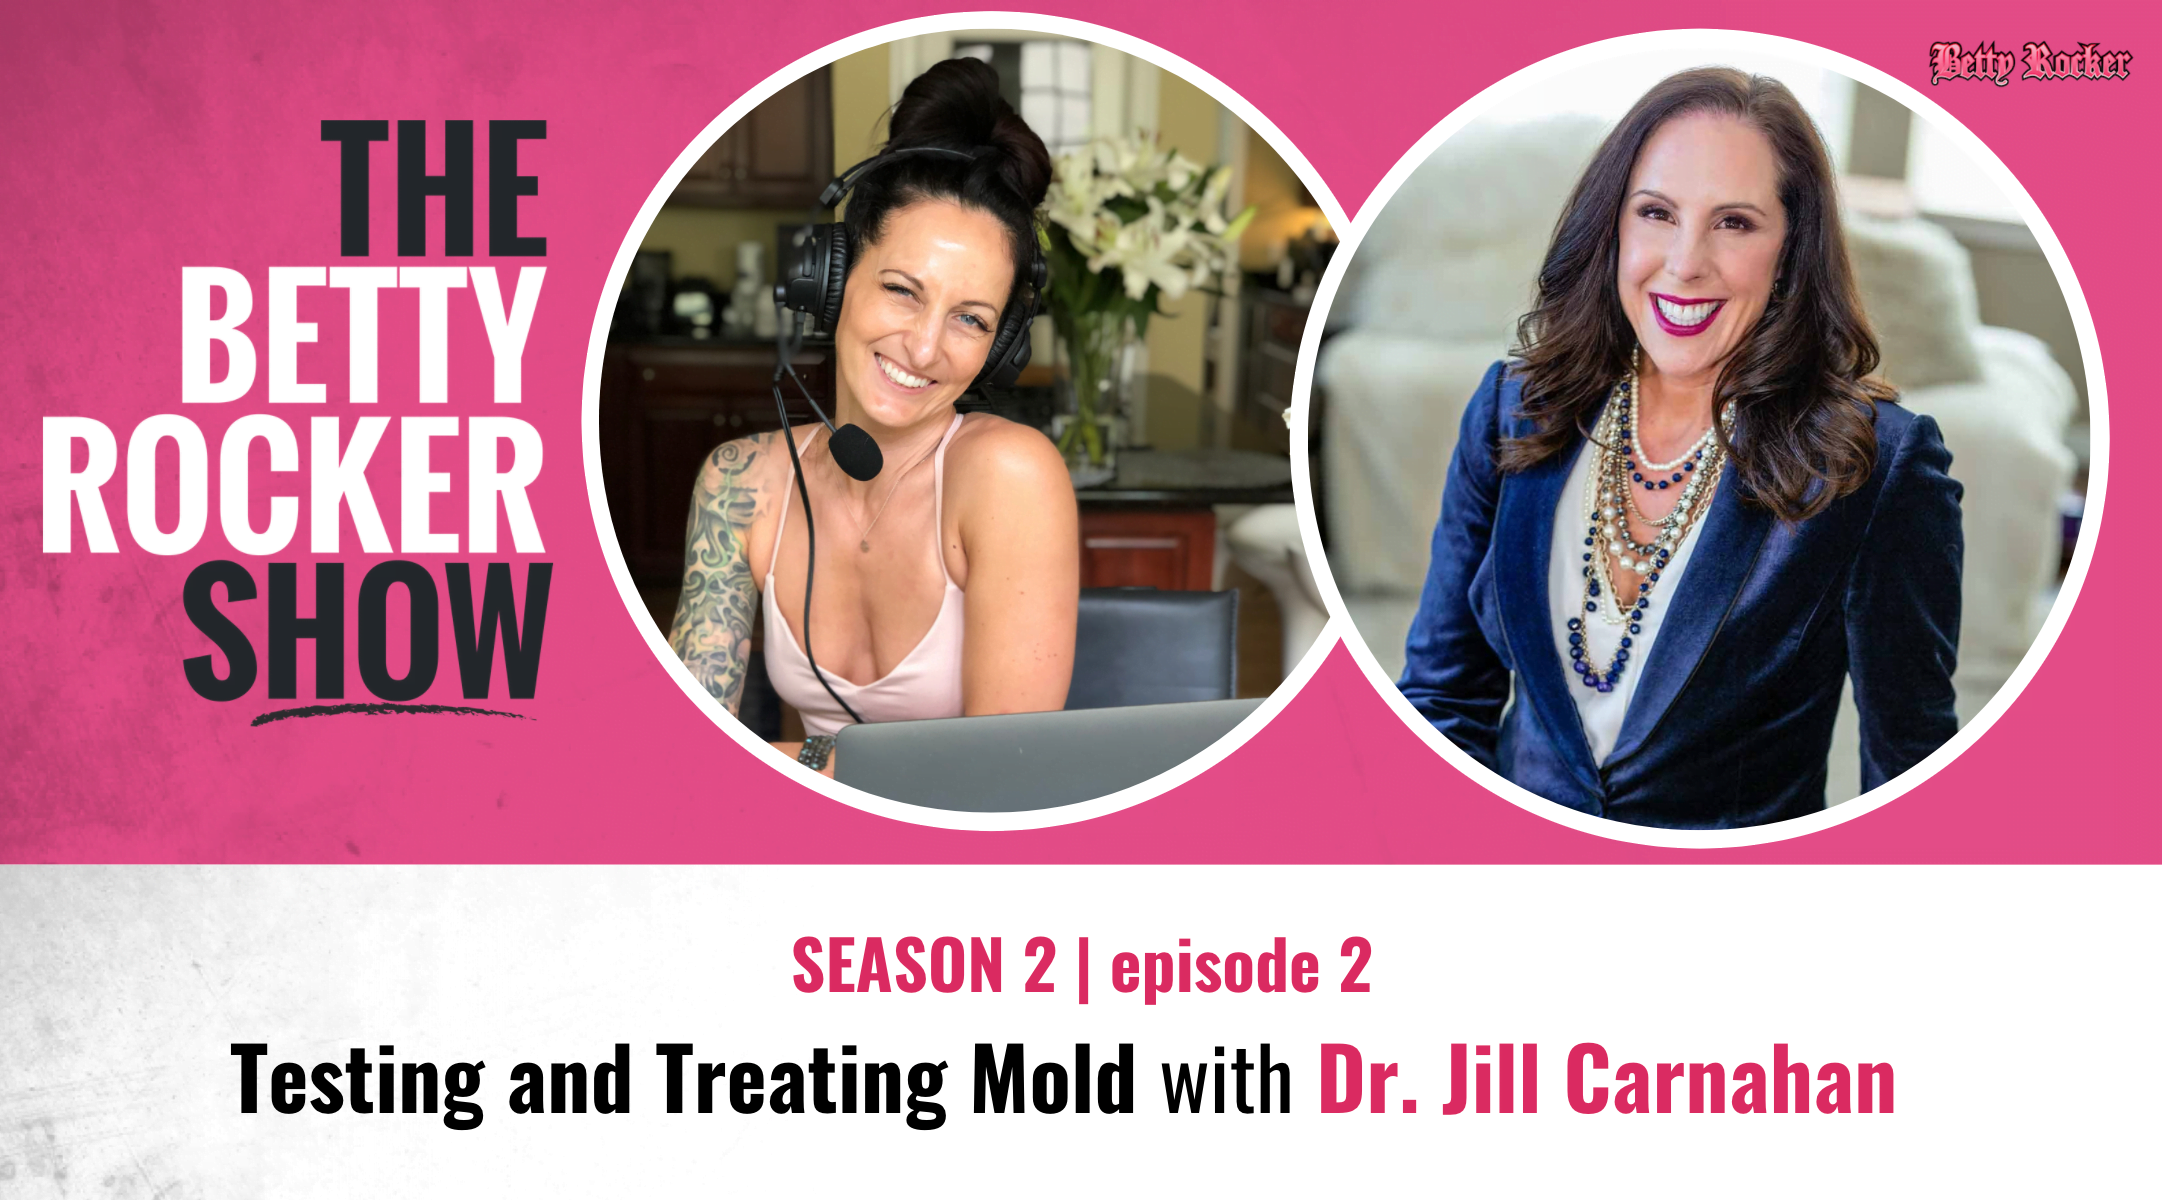 S2 – 2: Testing and Treating Mold with Dr. Jill Carnahan